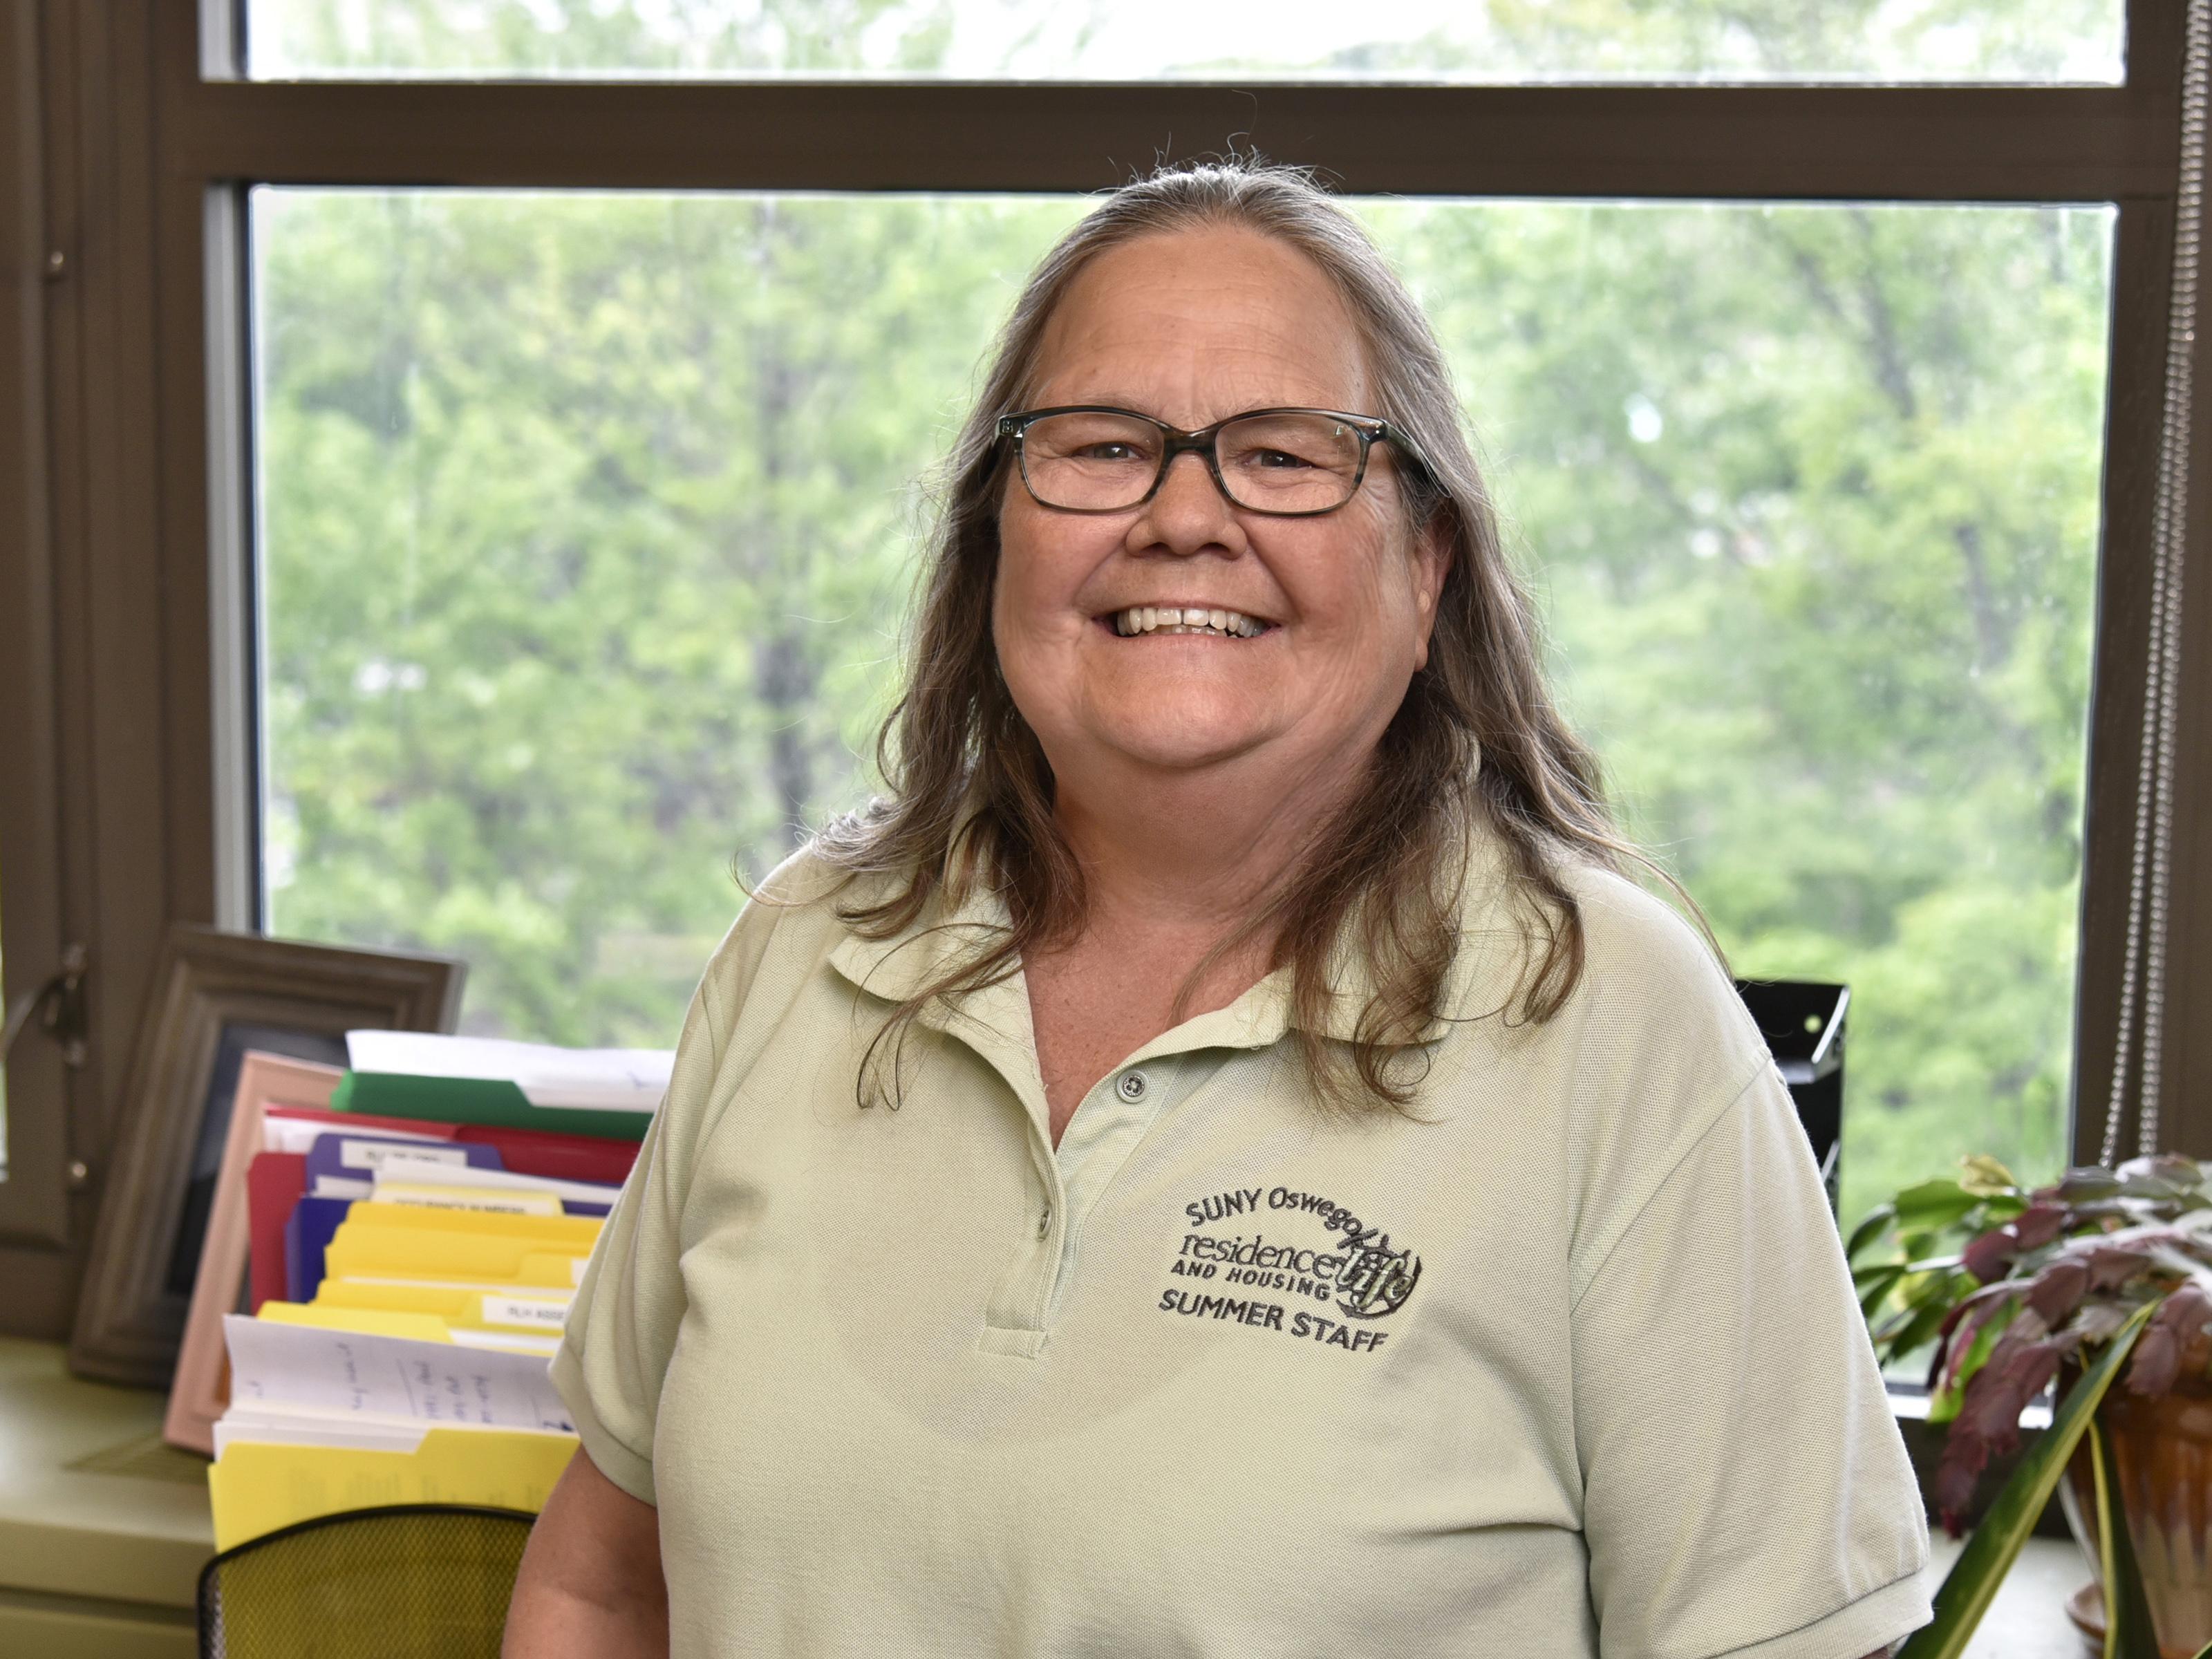 Mary Craw, an office assistant in Residence Life and Housing, earned the 2022 Chancellor’s Award for Excellence in Classified Service, recognizing four decades of service consistently putting students first.